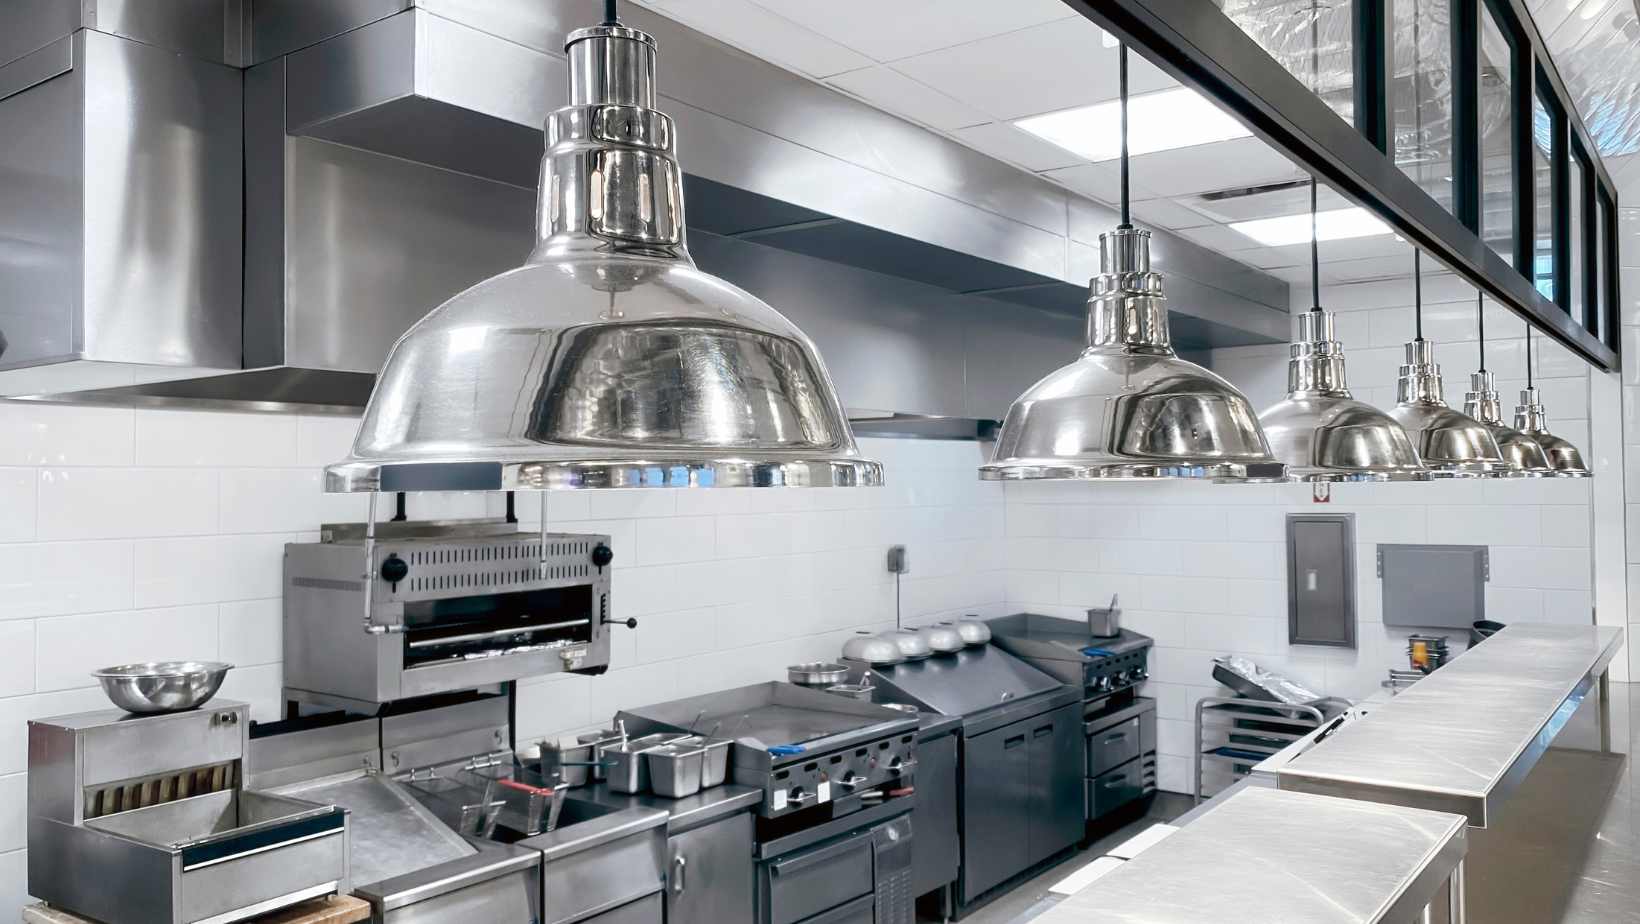 Discover top industrial kitchen design strategies to enhance efficiency and safety in your commercial cooking operations. Learn about custom layouts, equipment selection, and innovative technology integration to optimize your industrial kitchen today! 